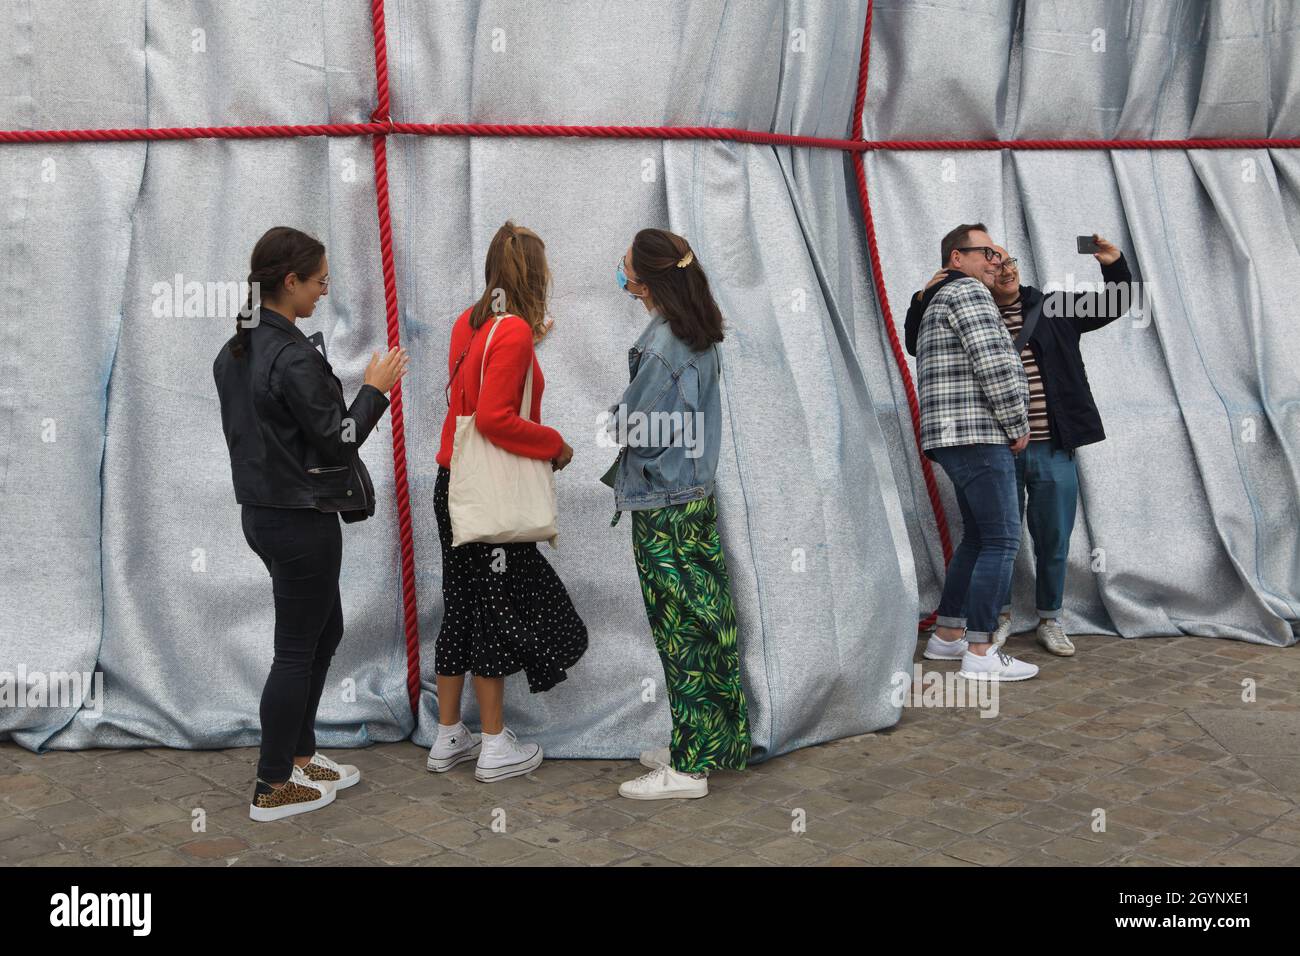 Couple uses a smartphone to make a selfie in front of the Arc de Triomphe wrapped in silver-blue fabric fastened with red ropes in the Place Charles de Gaulle in Paris, France. The Arc de Triomphe was wrapped for two weeks being converted to an artwork as it was designed by Christo and Jeanne-Claude in September 2021. Stock Photo